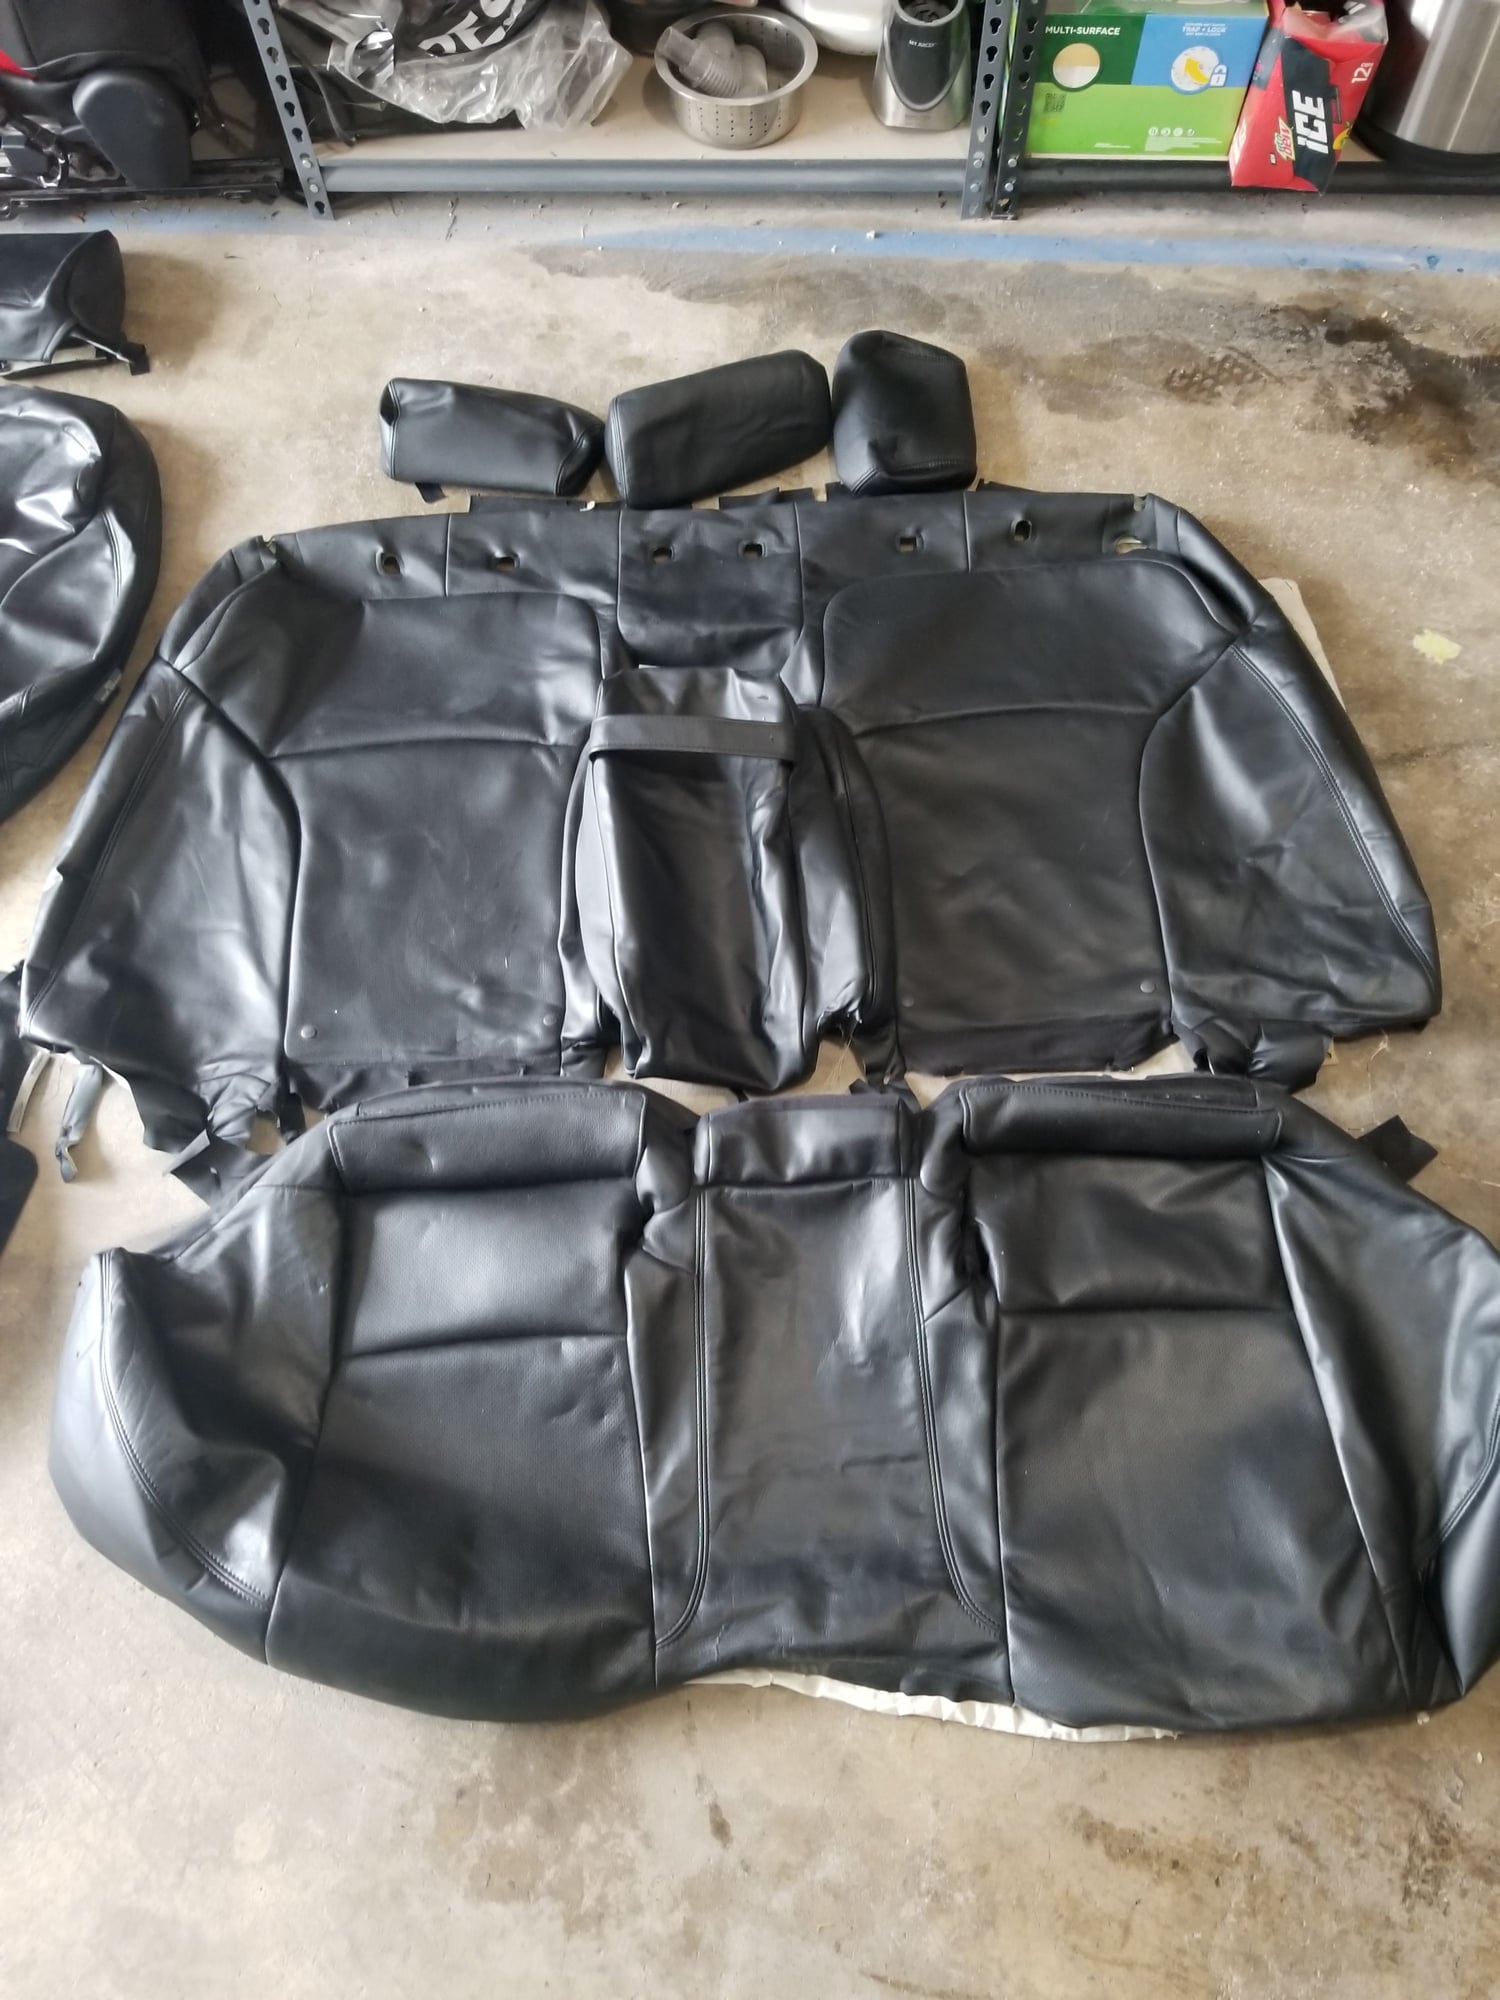 Interior/Upholstery - 2006-2013 IS250 IS350 oem black leather - Used - 2006 to 2013 Lexus IS250 - Dublin, OH 43017, United States